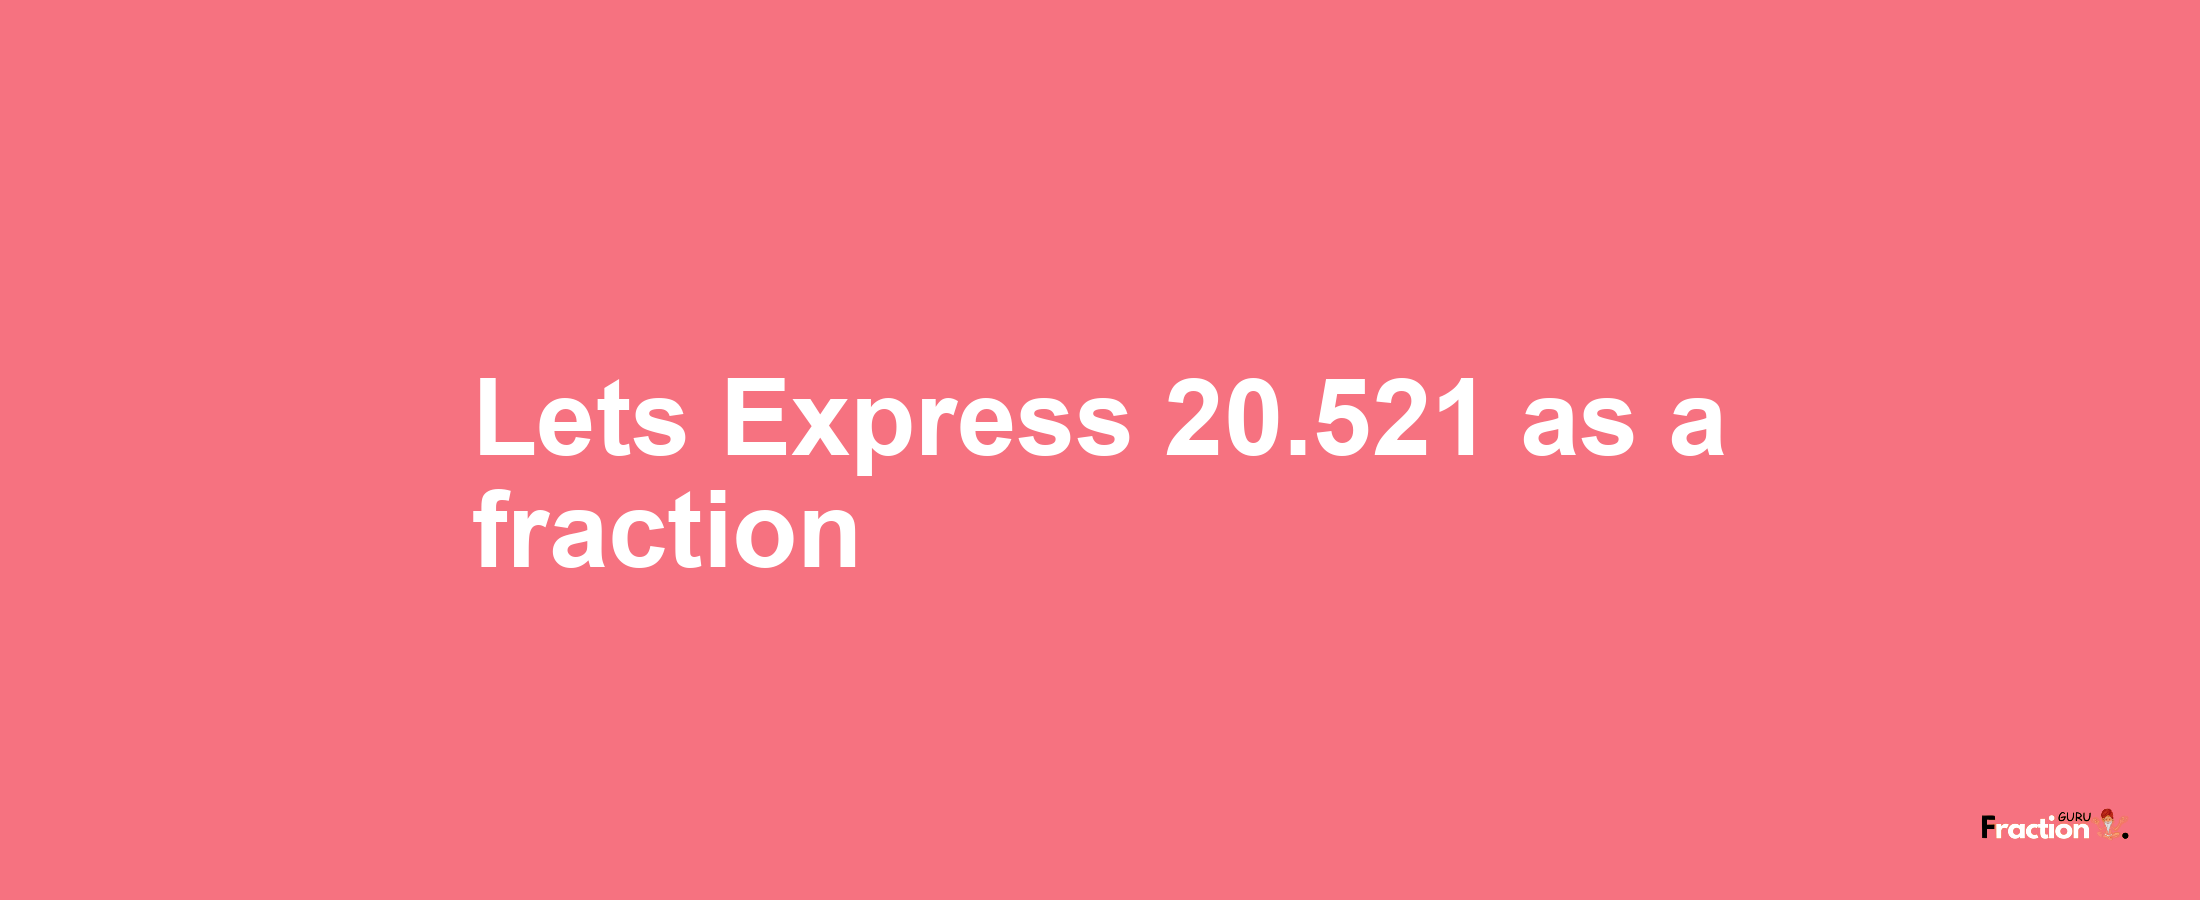 Lets Express 20.521 as afraction